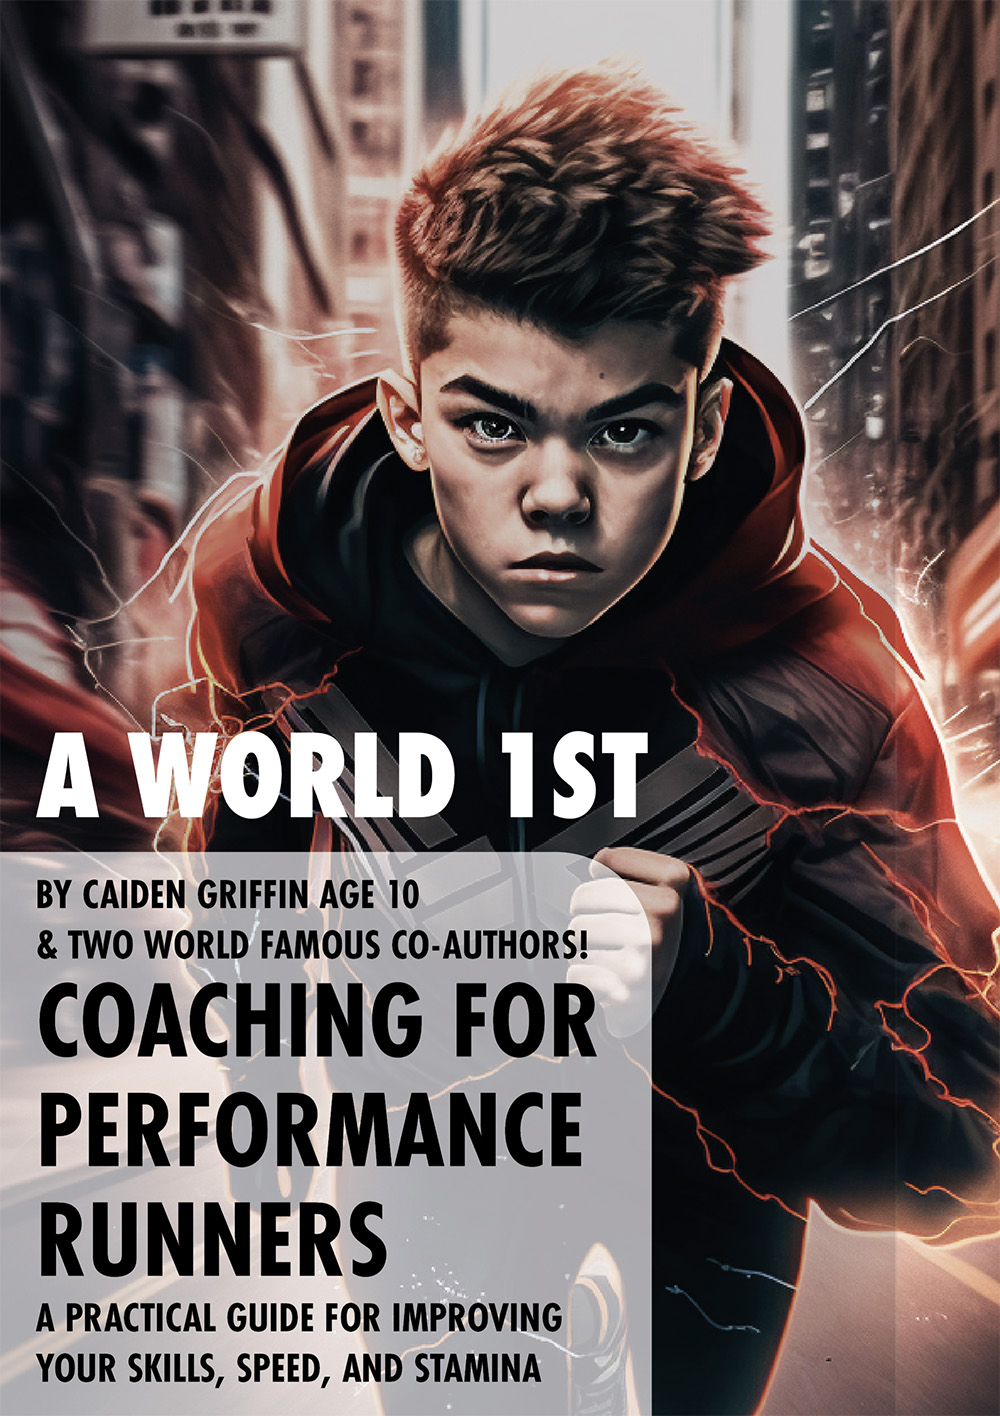 Coaching for Performance Runners by Caiden Griffin